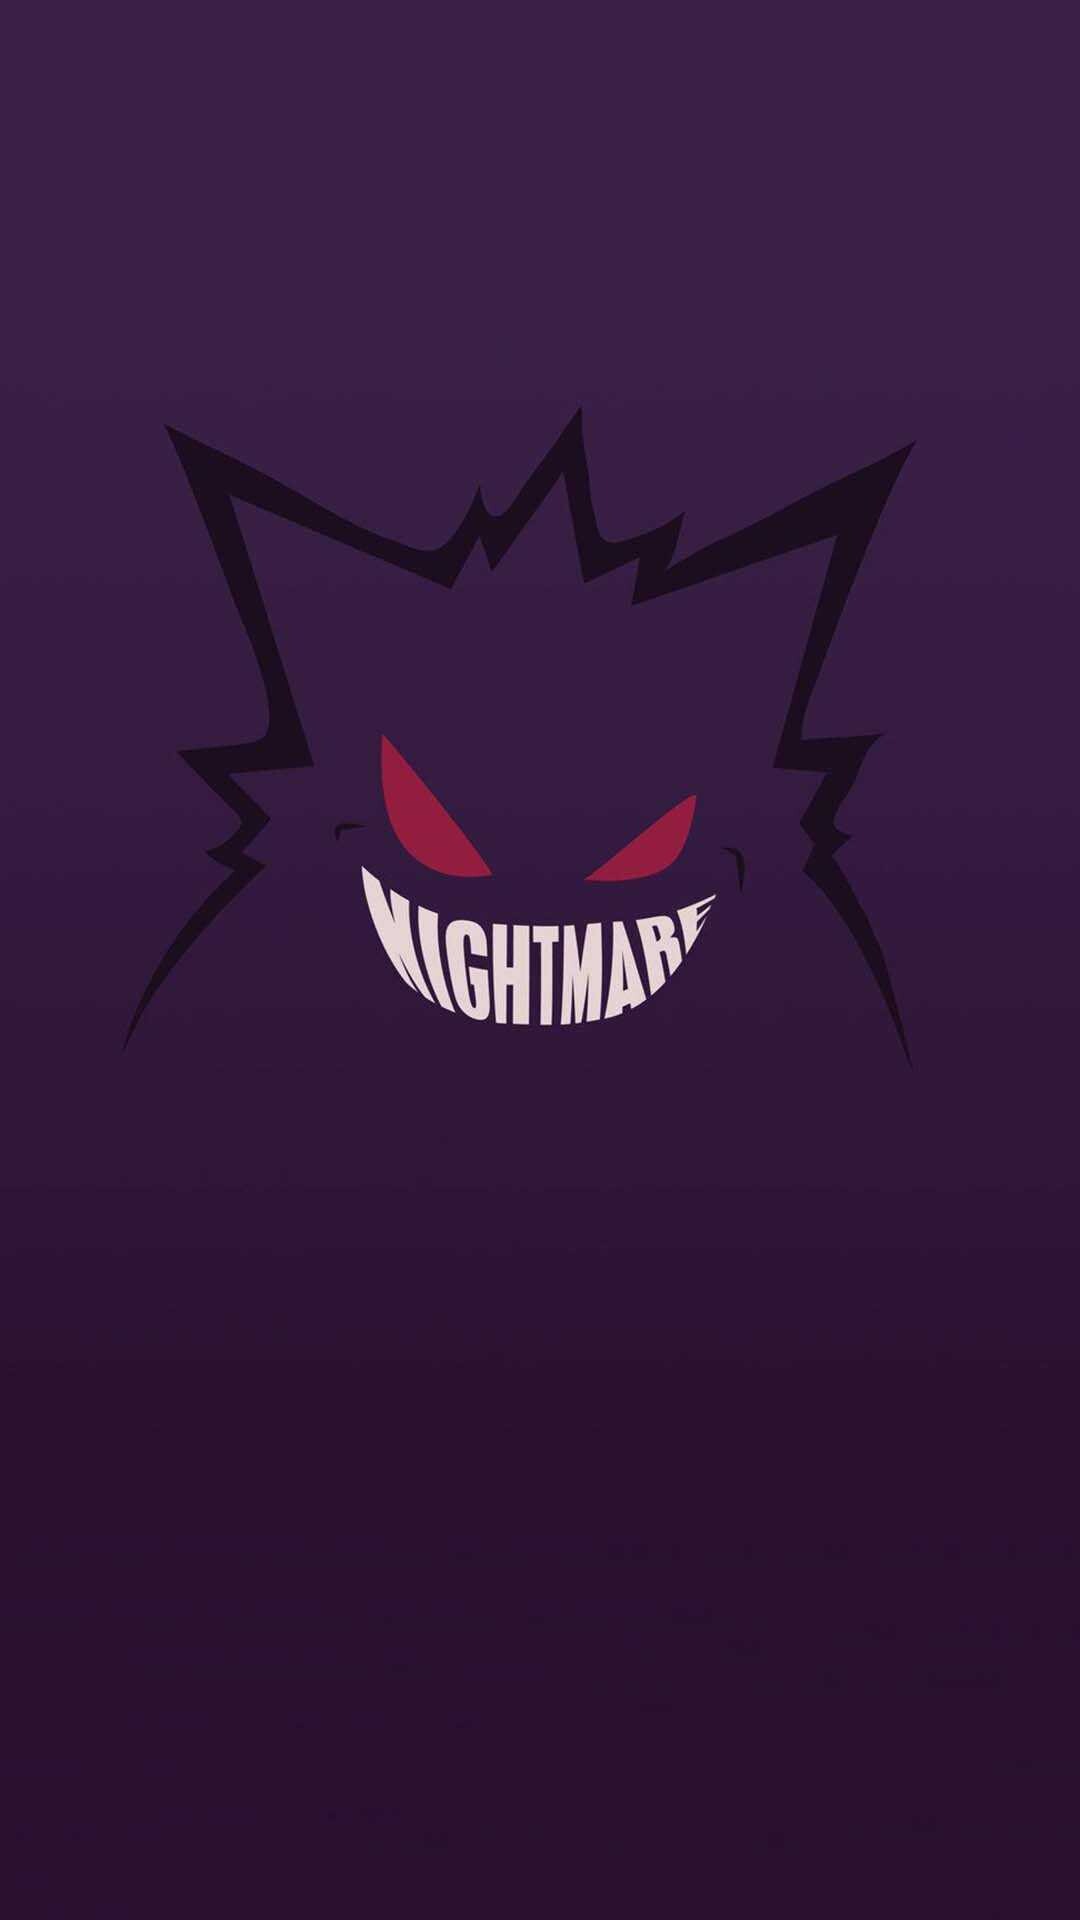 Gengar: Small spikes on top of the head similar to tufty fur, Mean-spirited and enjoying tormenting people. 1080x1920 Full HD Wallpaper.